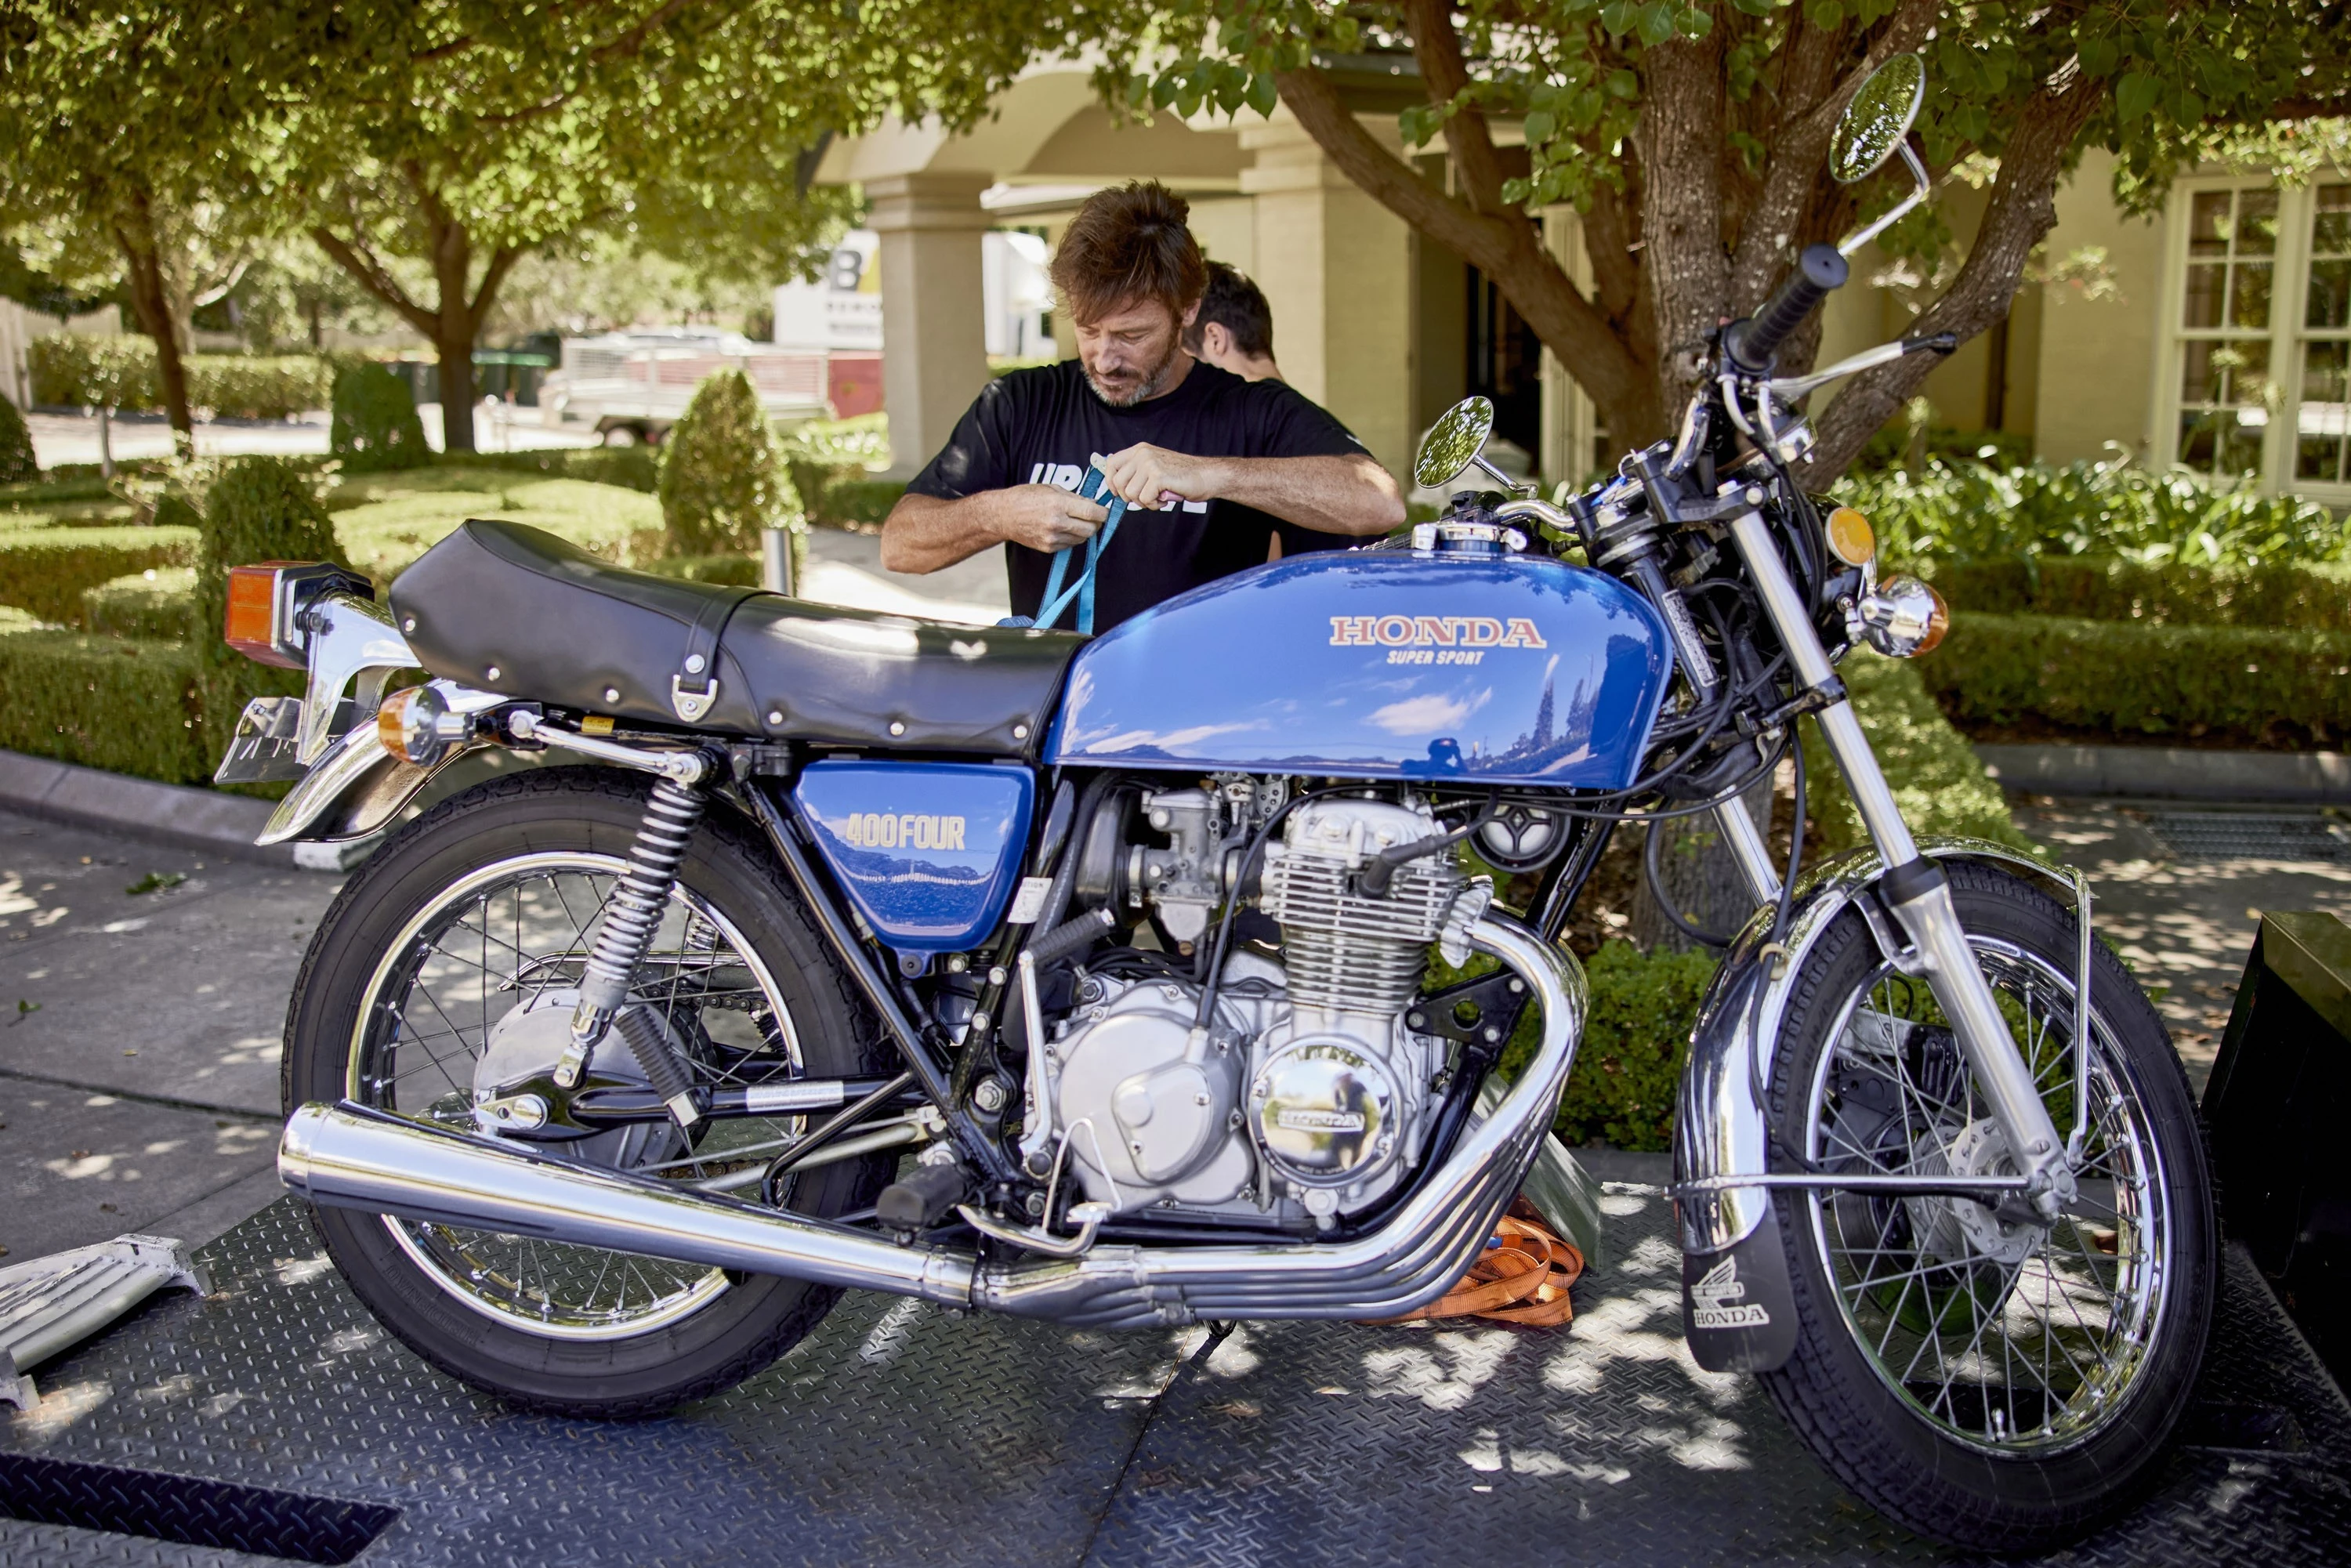 How to safely prepare your motorcycle for transport